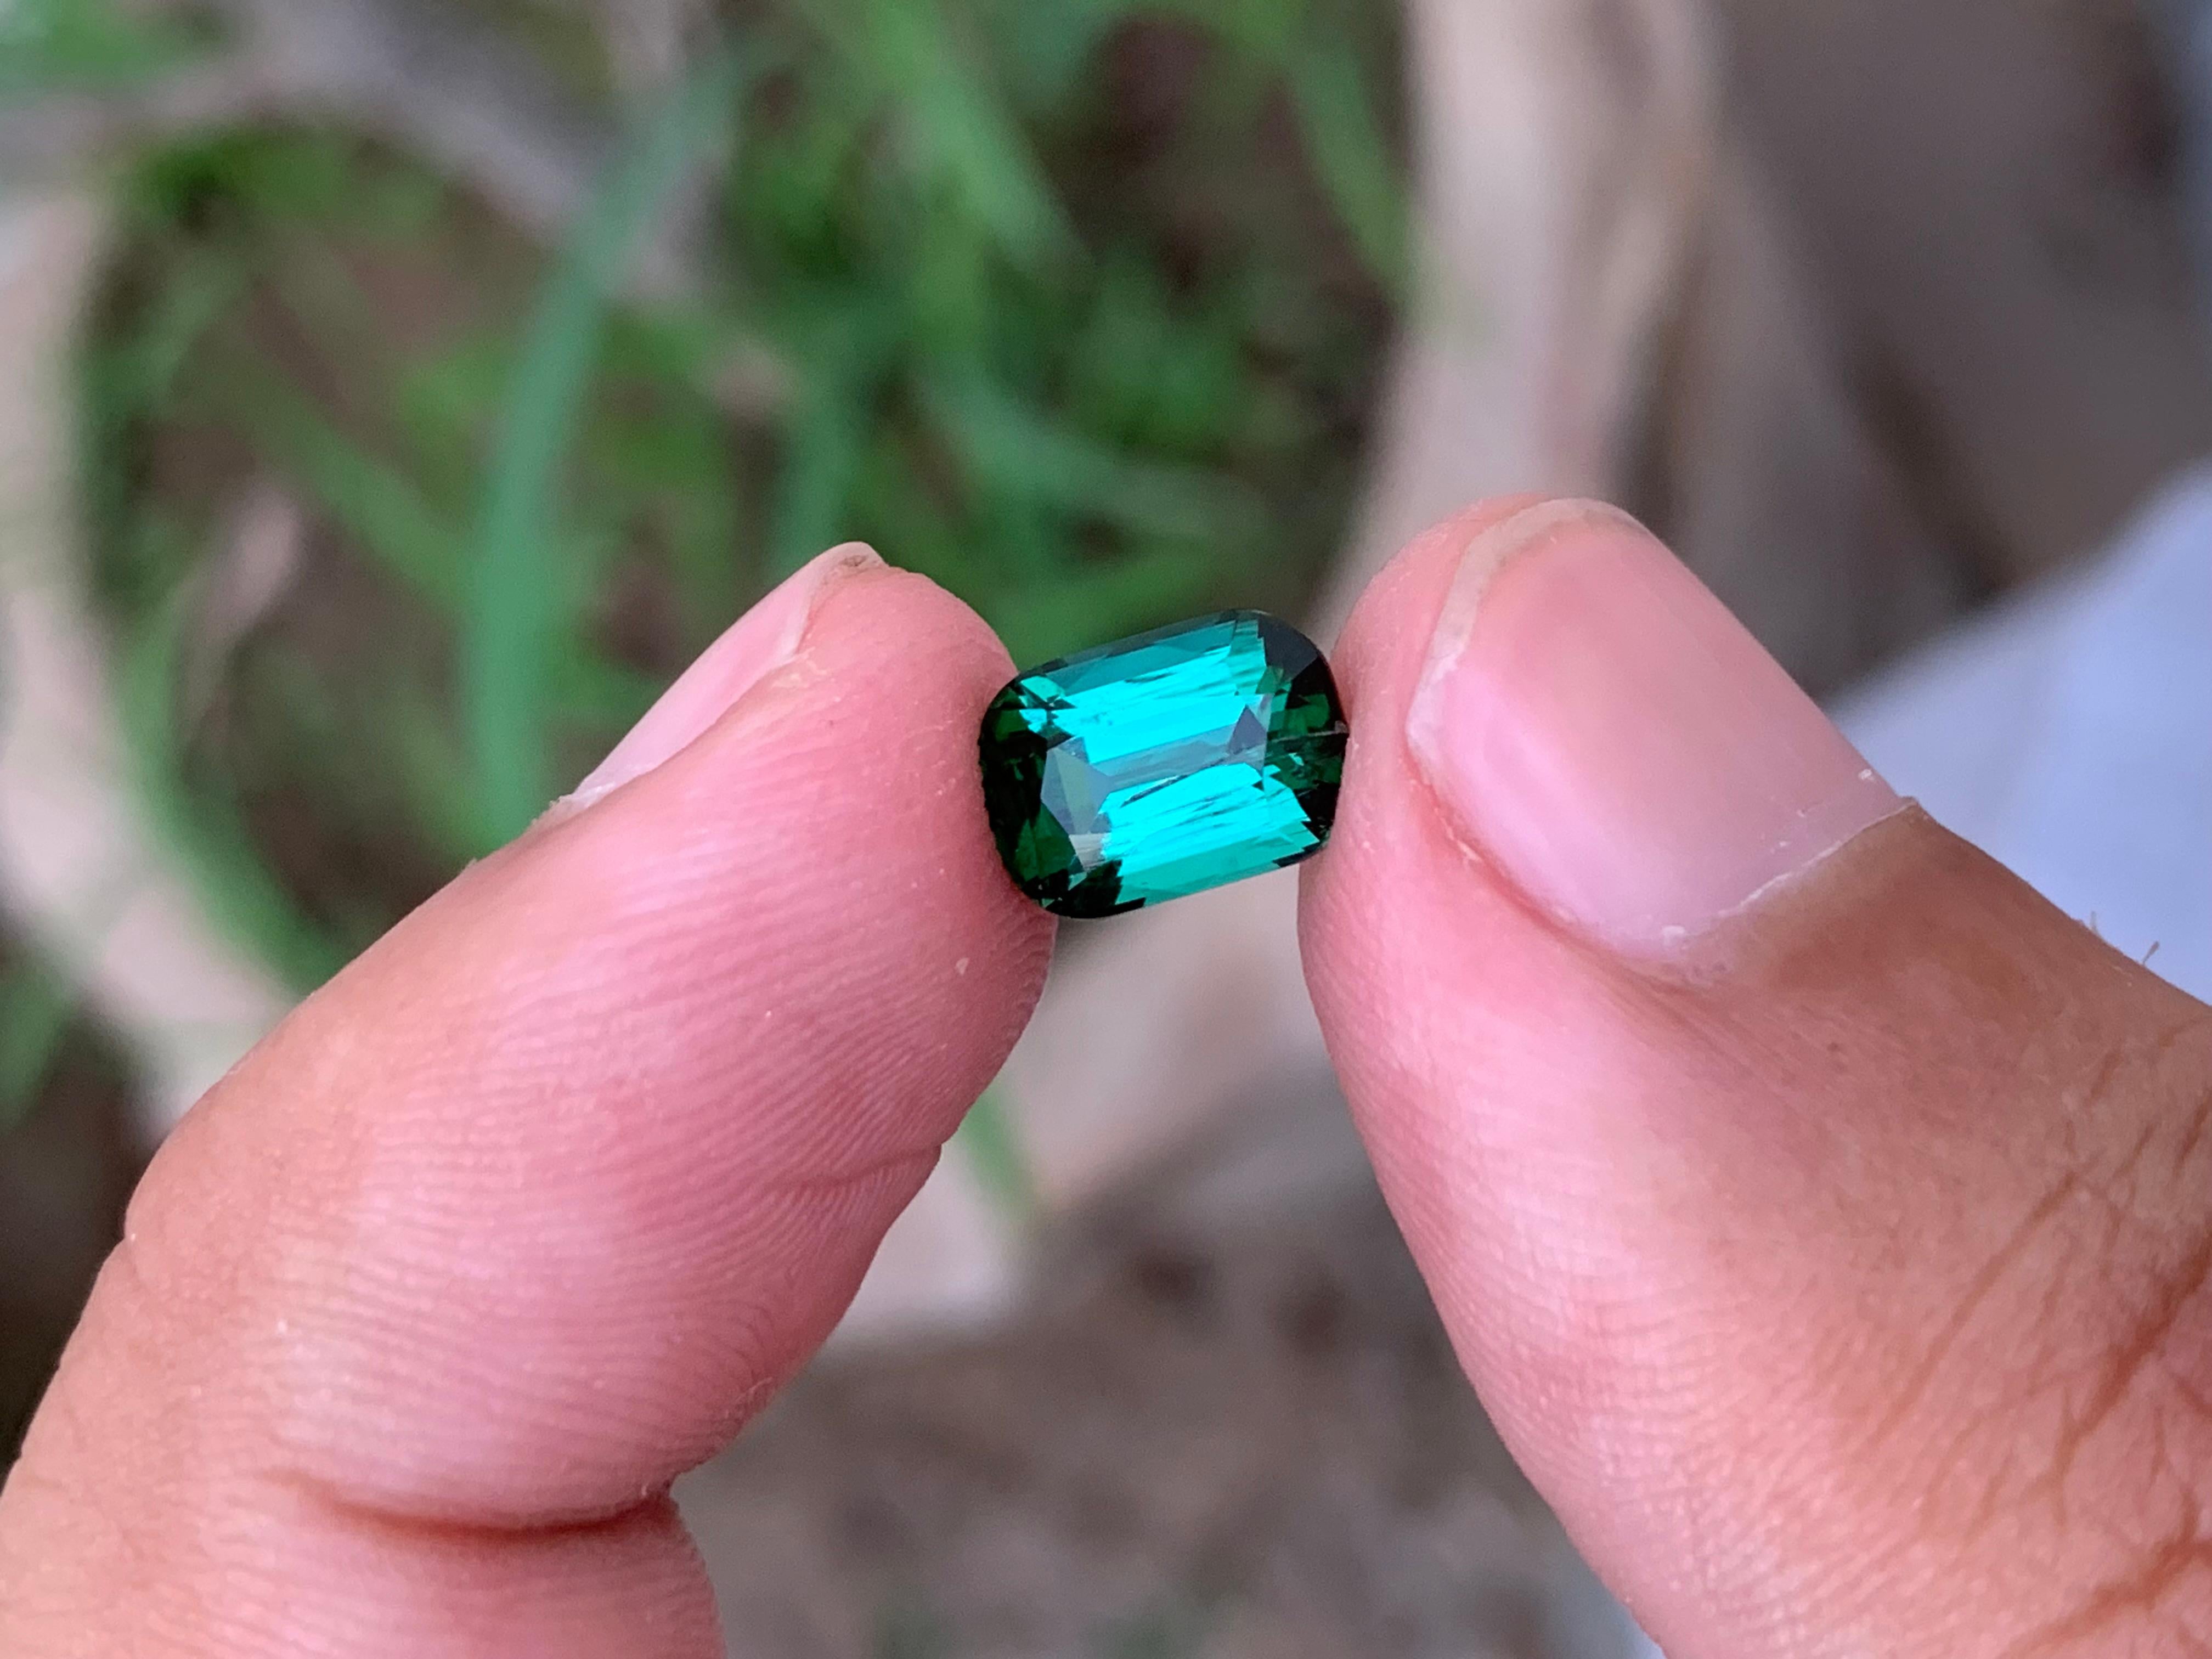 Loose Tourmaline 
Weight: 2.25 Carats 
Dimension: 8.9x6.3x5.1 Mm
Origin: Kunar Afghanistan
Shape: Cushion
Color: Green With Blue Shade
Treatment: Non
Clarity: Small Include 
Treatment: Non
Certificate: On Customer Demand 
Afghanistan has long been